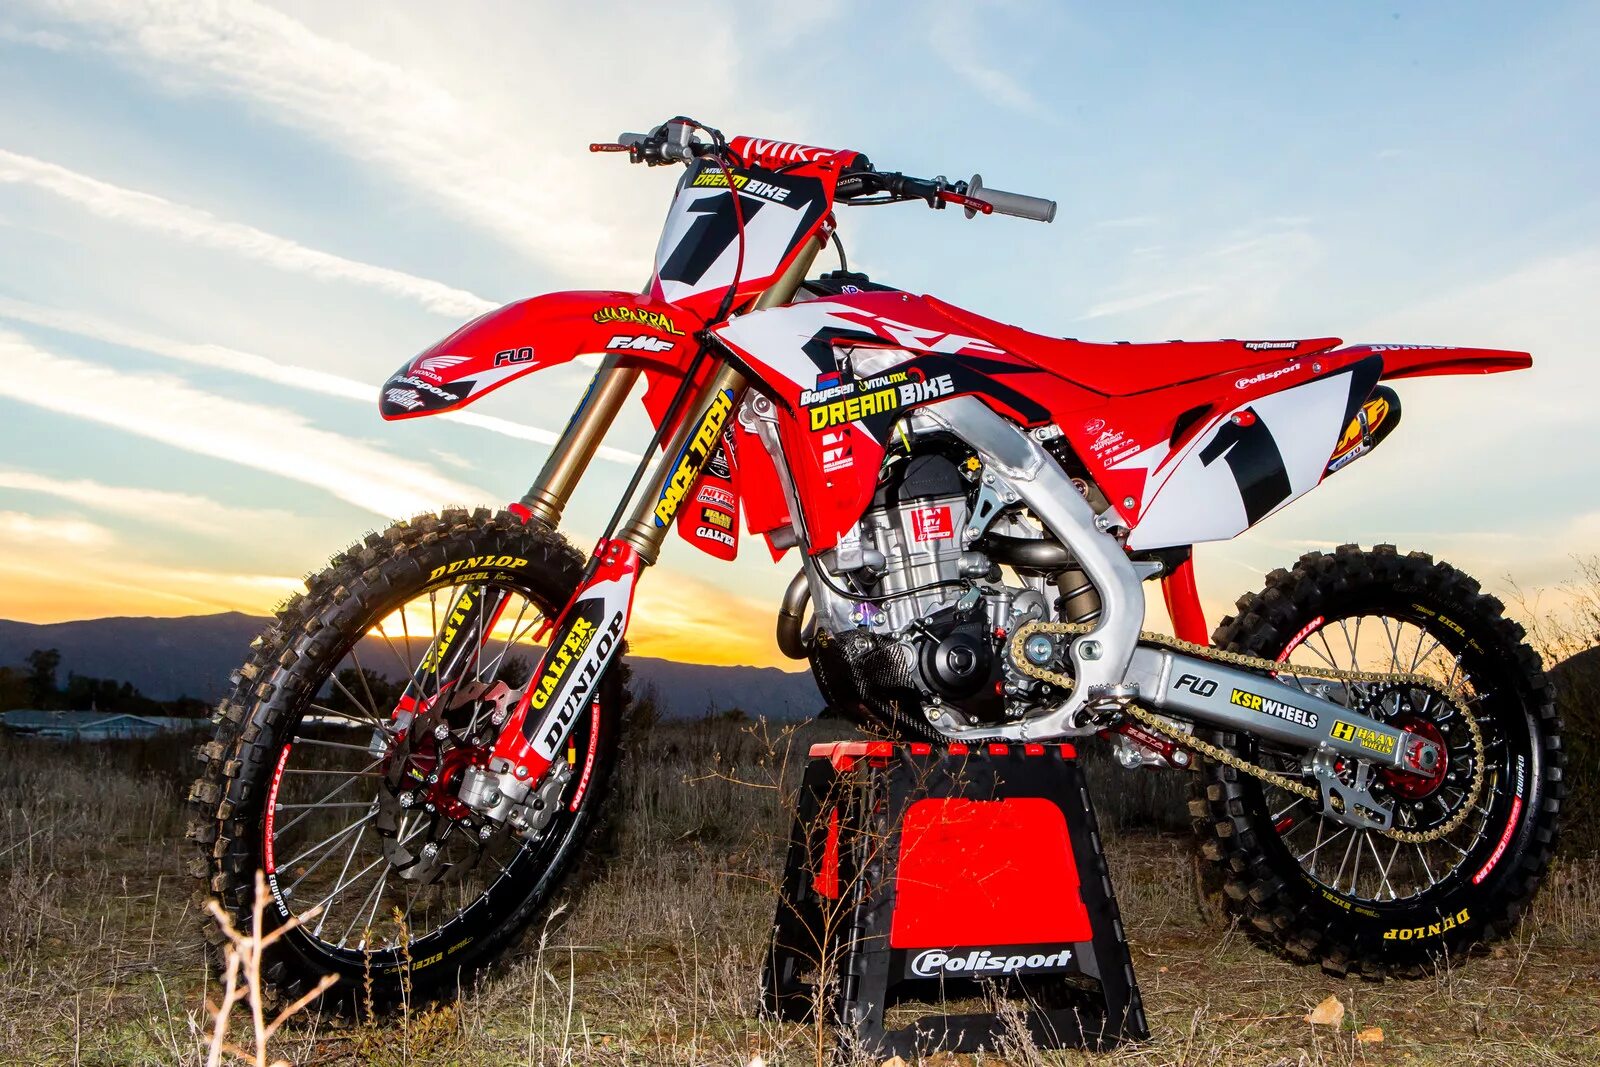 Honda crf 450r. Honda crf450r build. Honda CRF 450 build. Honda CRF 450r with Timbersled.